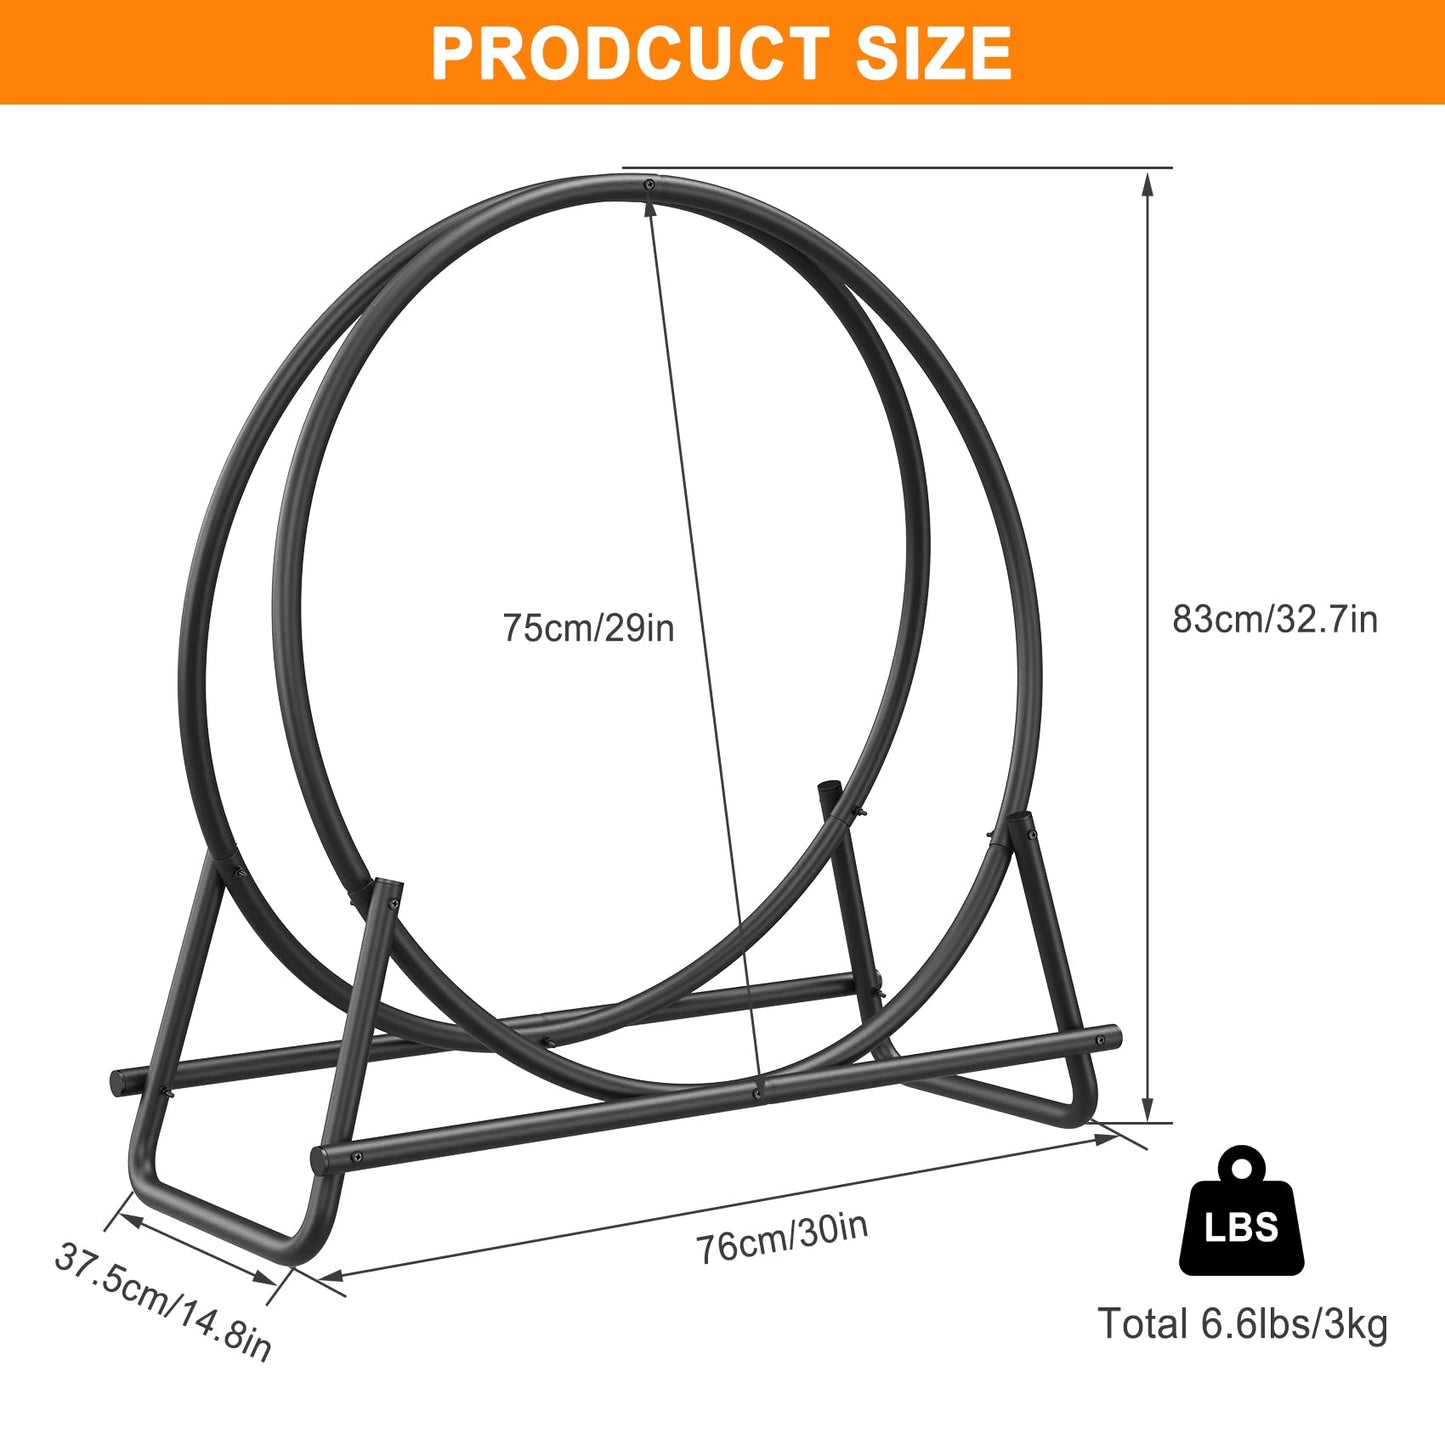 Mr IRONSTONE Firewood Rack - 30 inch Indoor/Outdoor Log Hoop for Neat and Easy Wood Storage, Tubular Steel Design for Patio, Deck, and Fireplace Pit